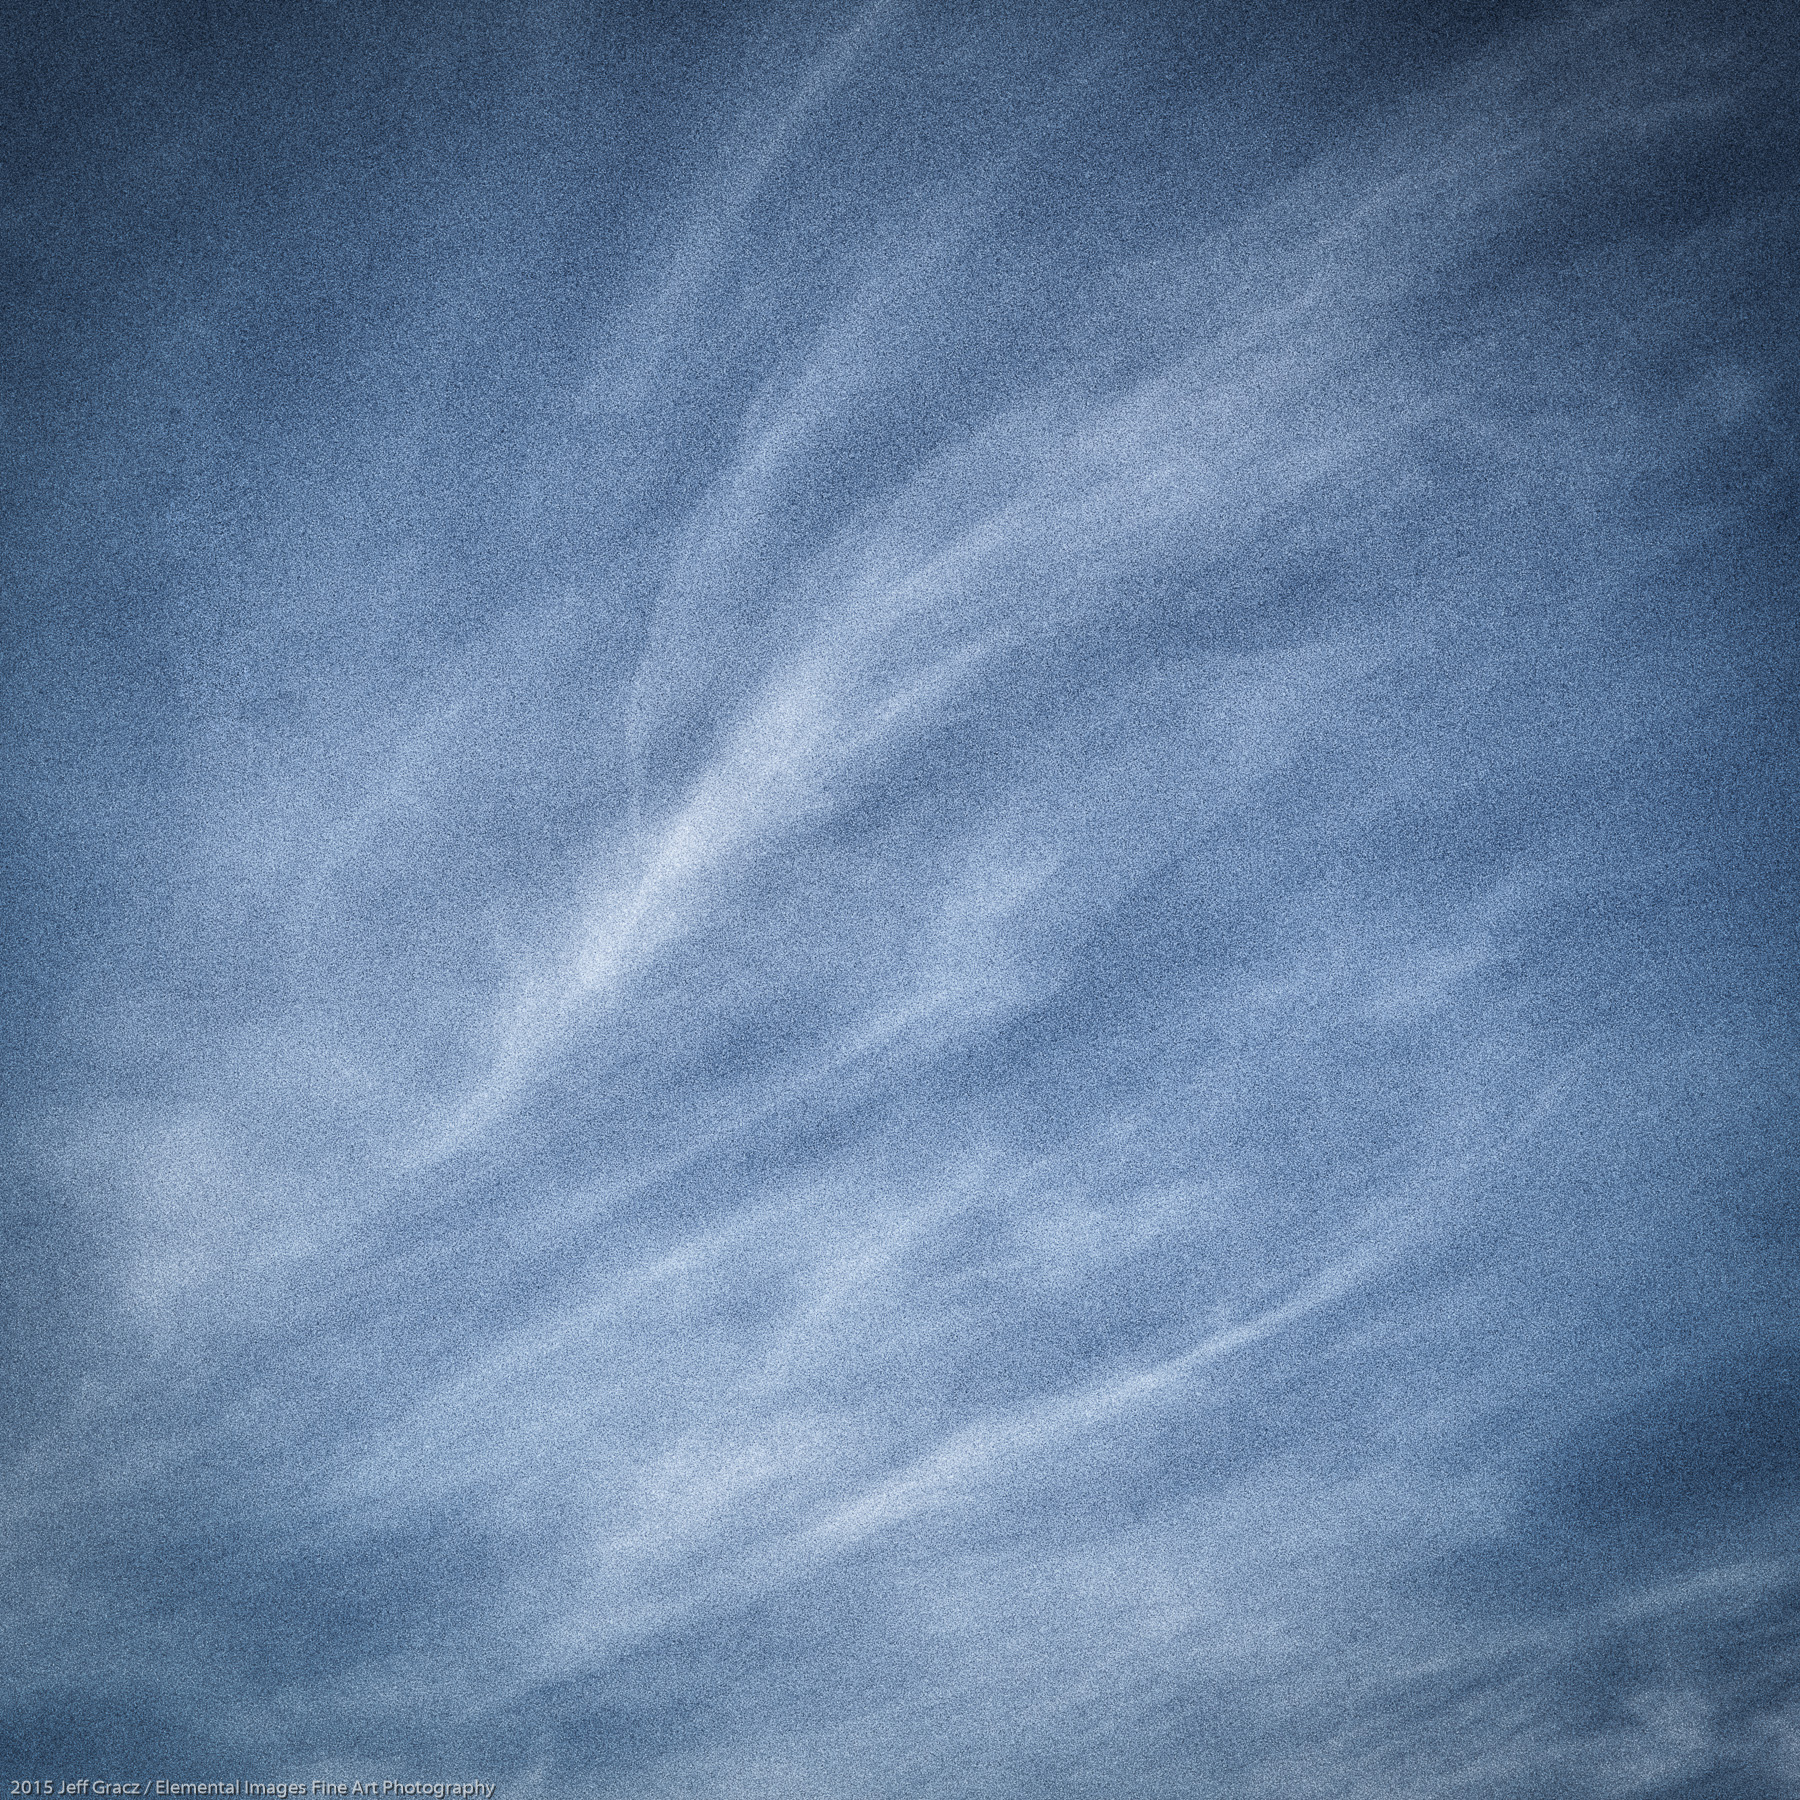 Skyscapes #2 | Vancouver | WA | USA - © 2015 Jeff Gracz / Elemental Images Fine Art Photography - All Rights Reserved Worldwide